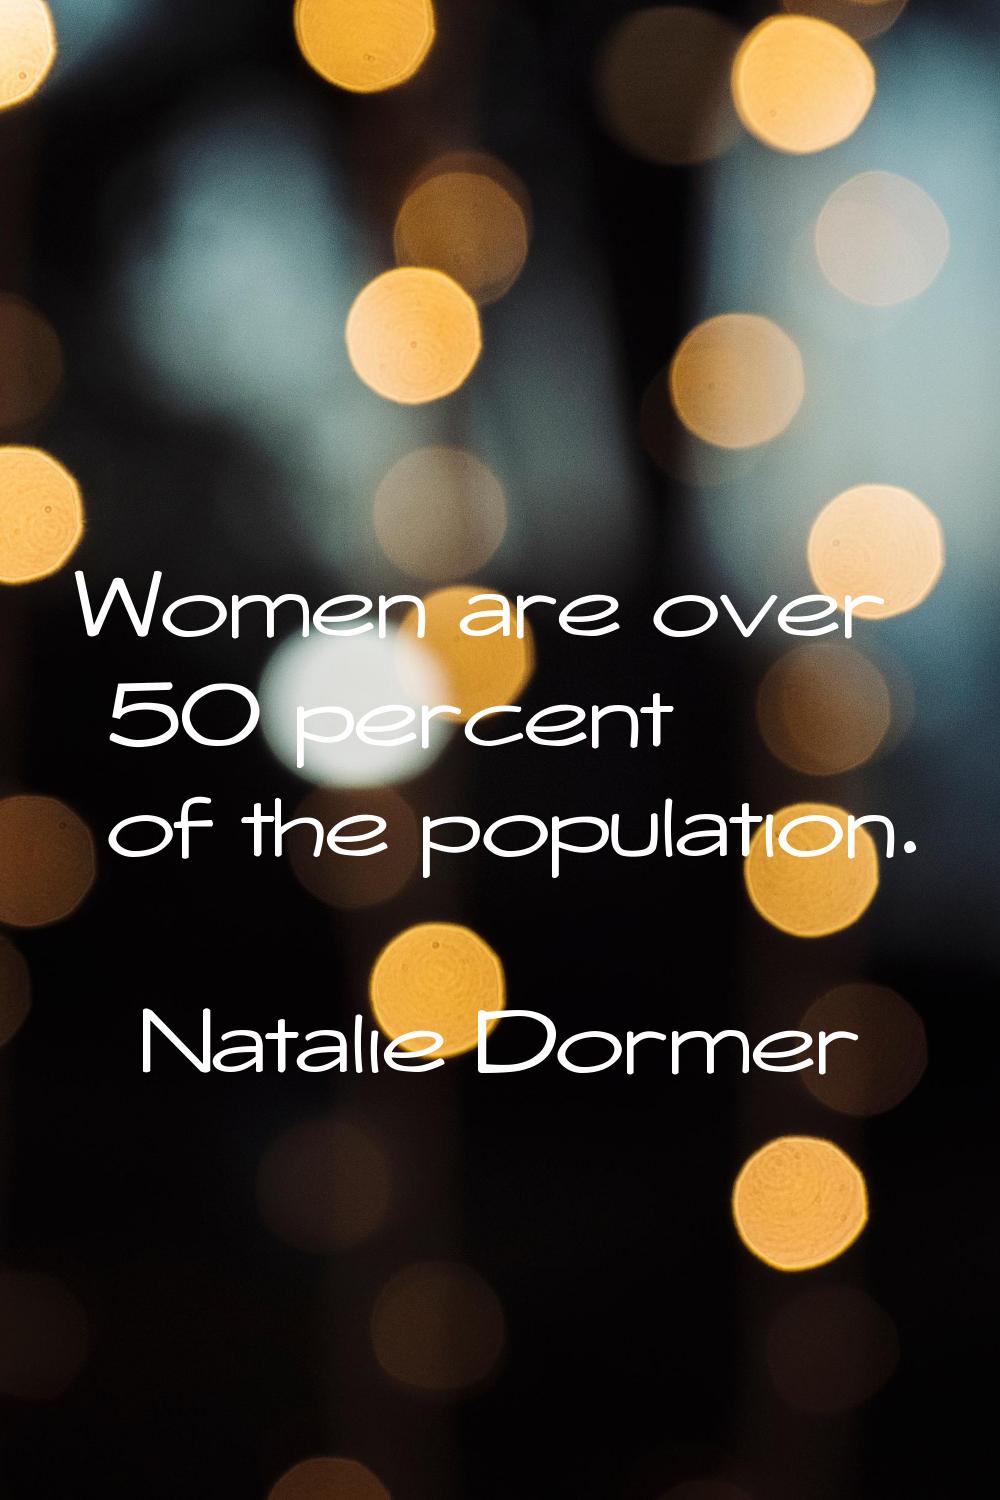 Women are over 50 percent of the population.